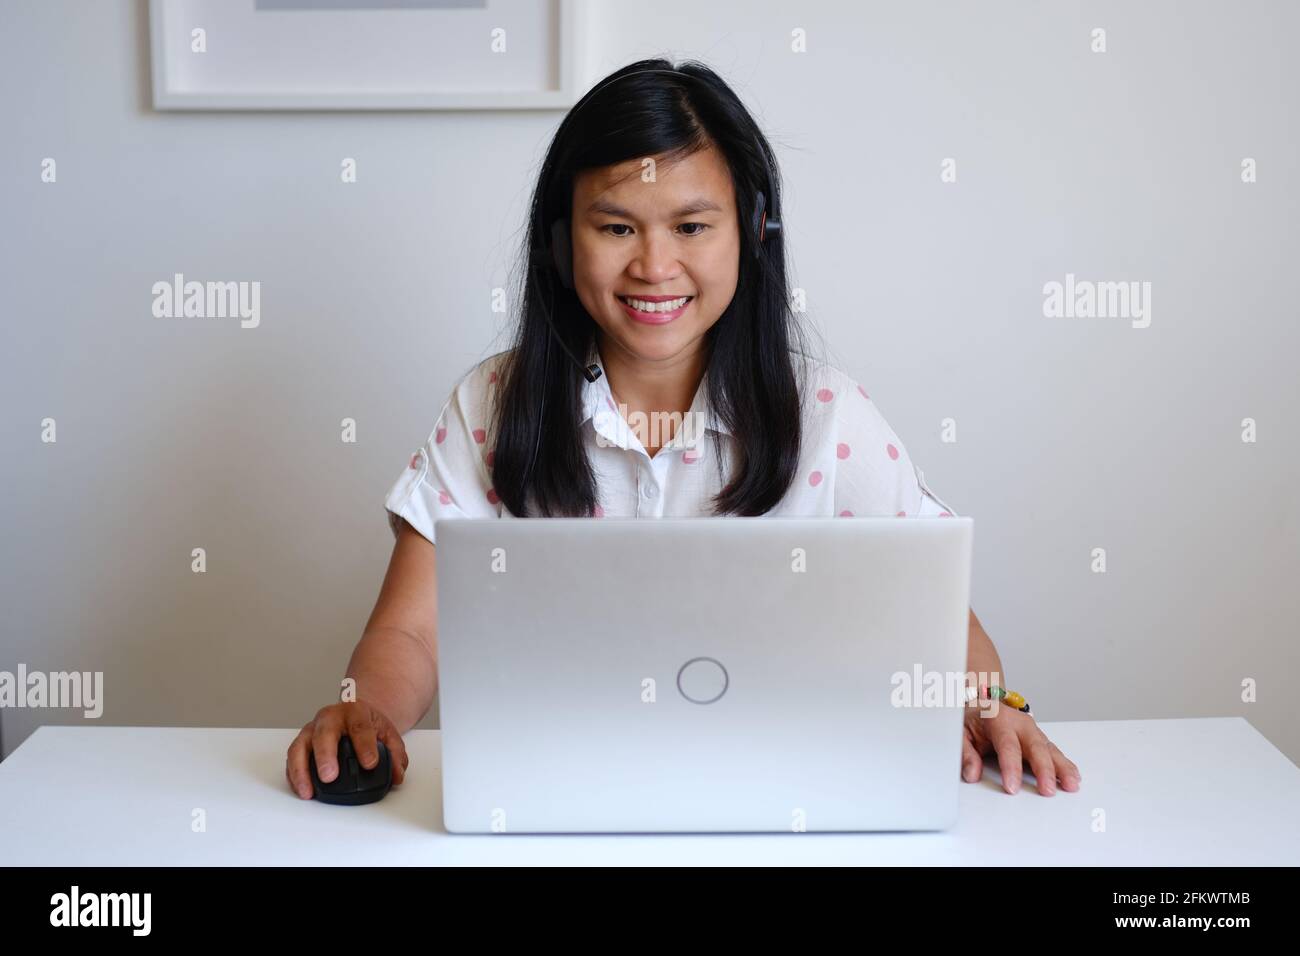 Filipino filipina Asian woman or girl teacher working sitting in front of a white desk and silver computer, teaching a lesson online on the Internet Stock Photo